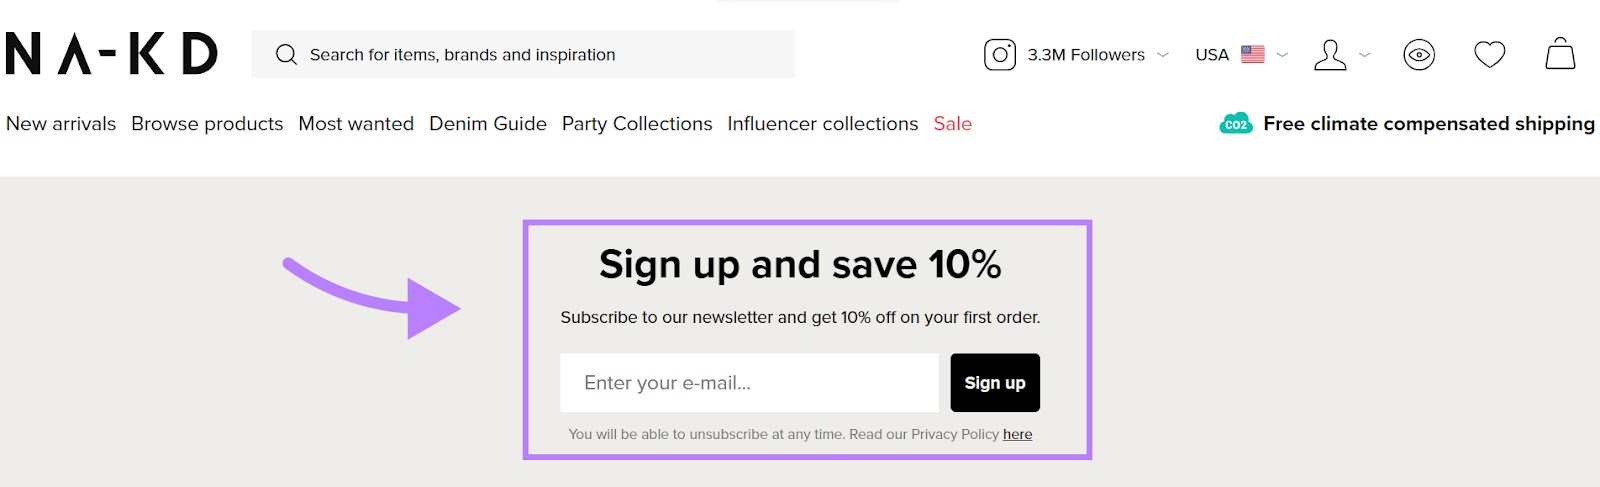 "Sign up and save 10%" message on NA-KD's website